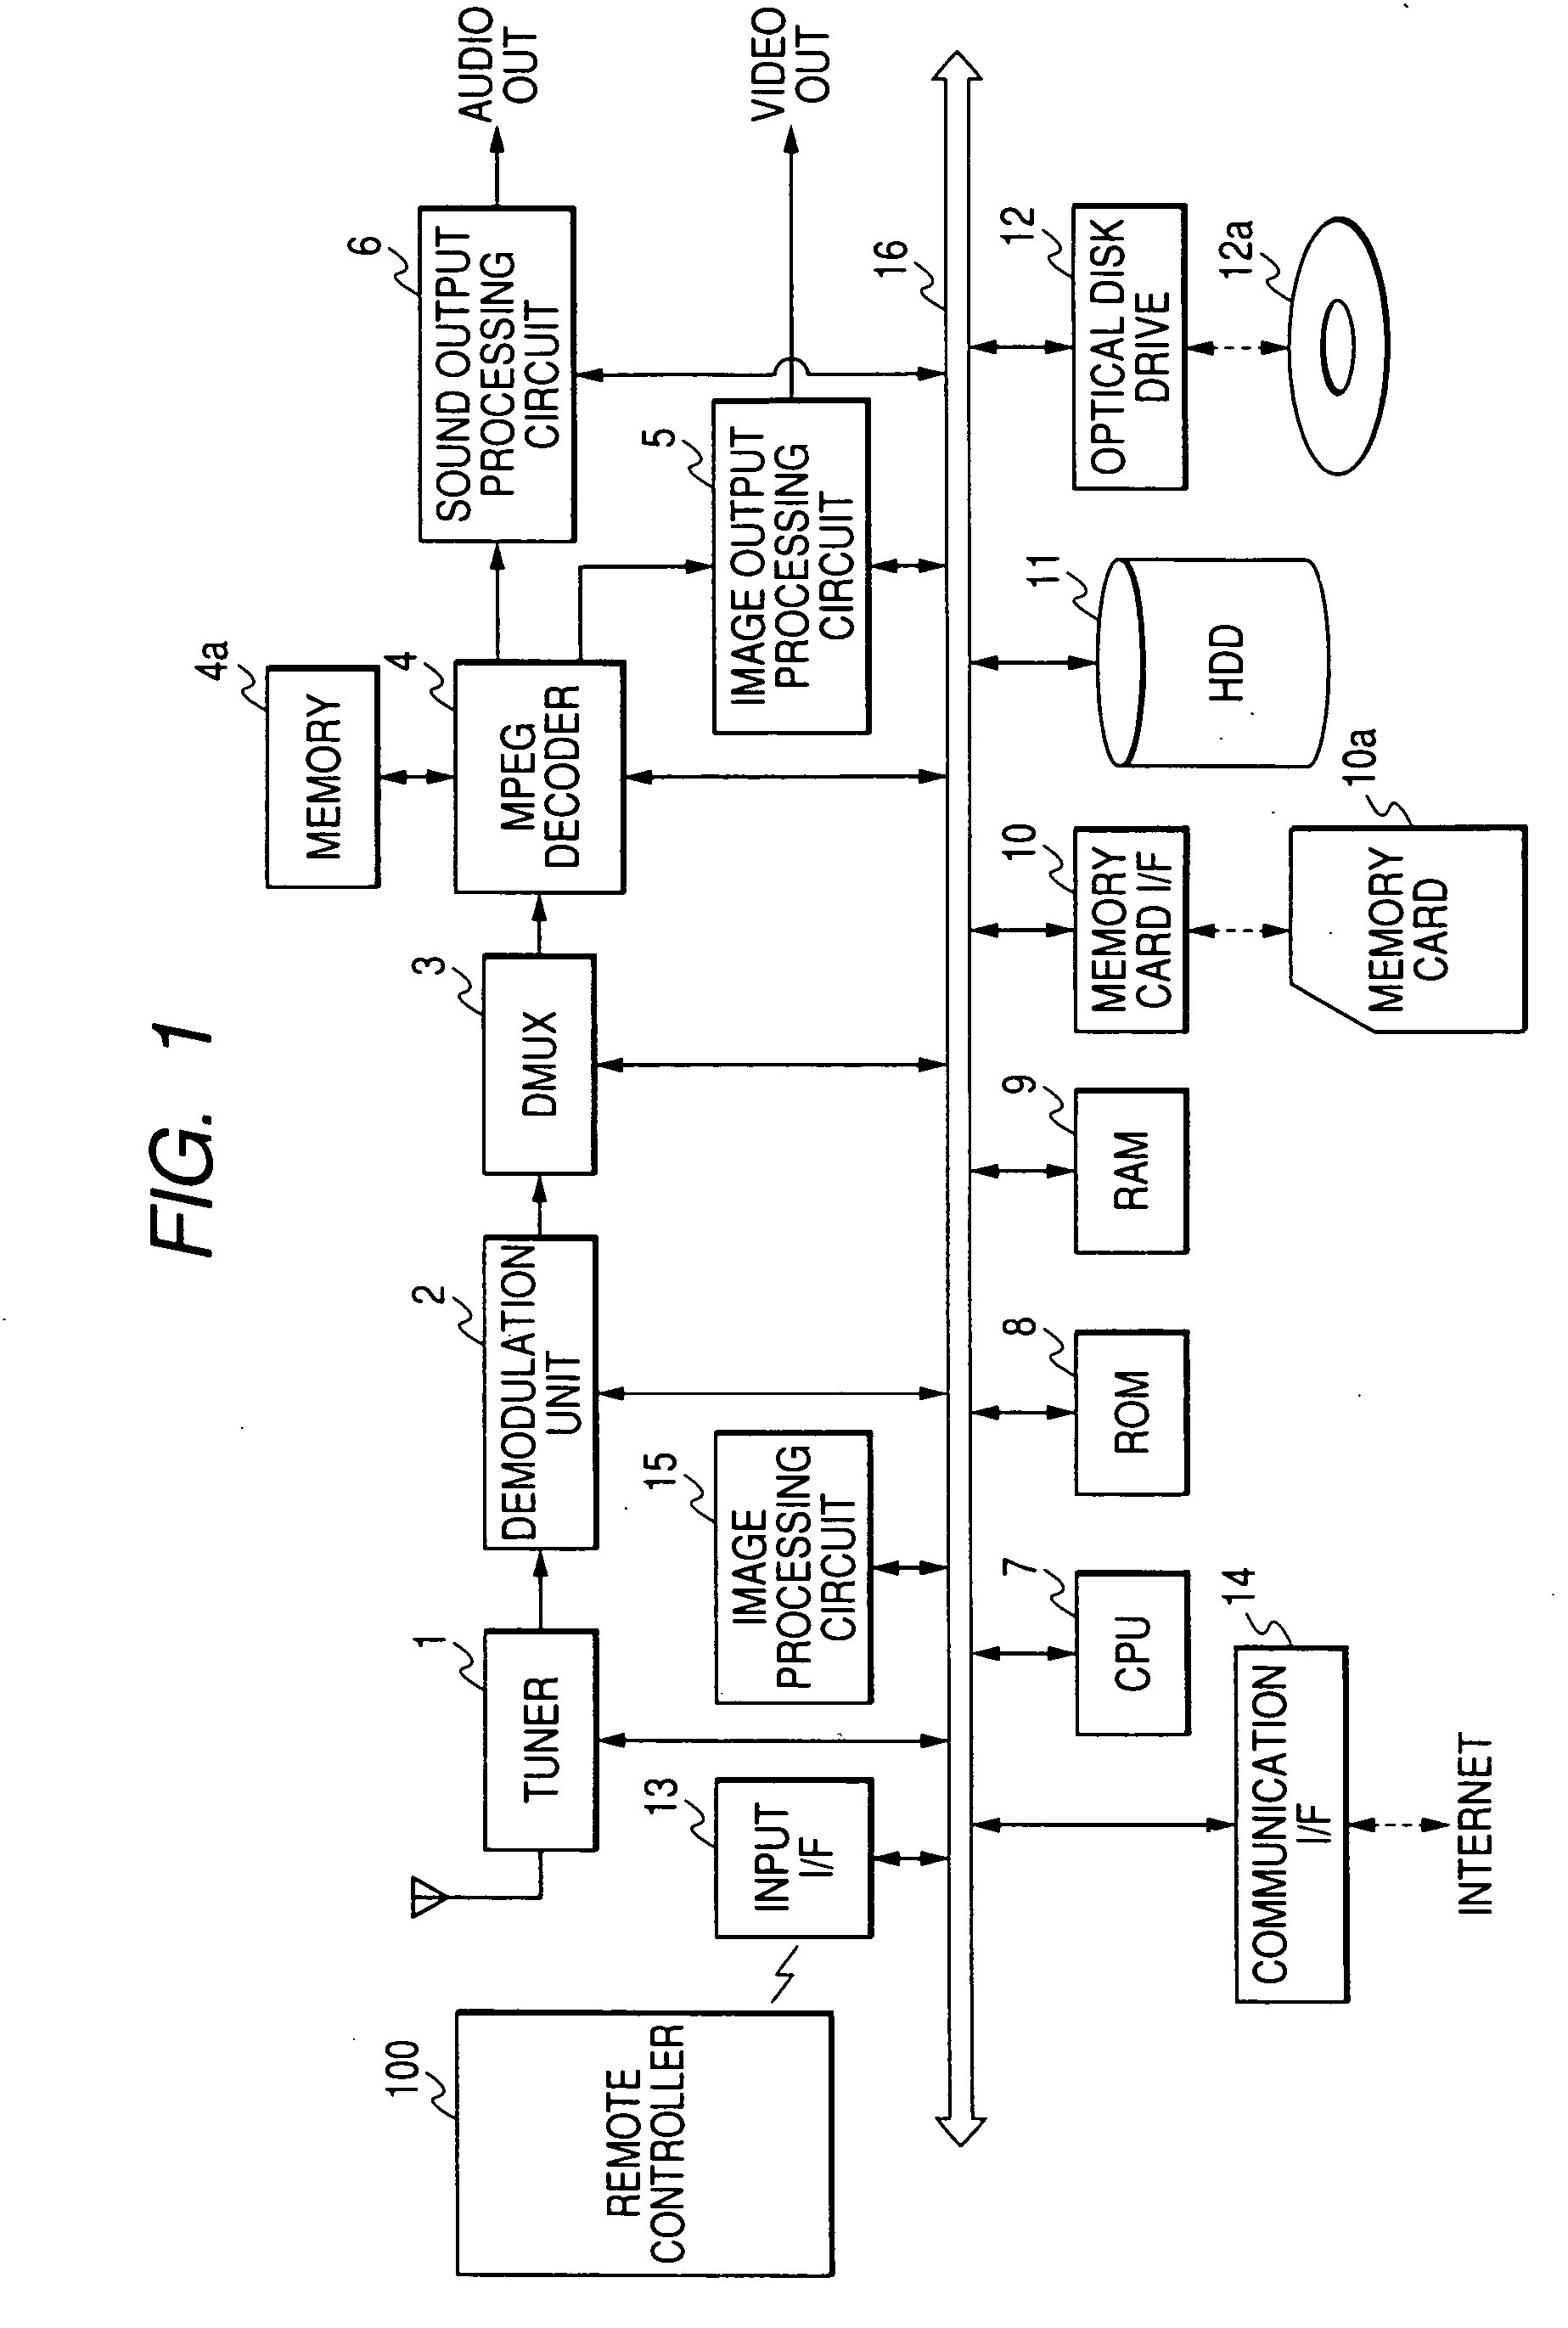 Image recording and reproducing apparatus, and image reproducing method